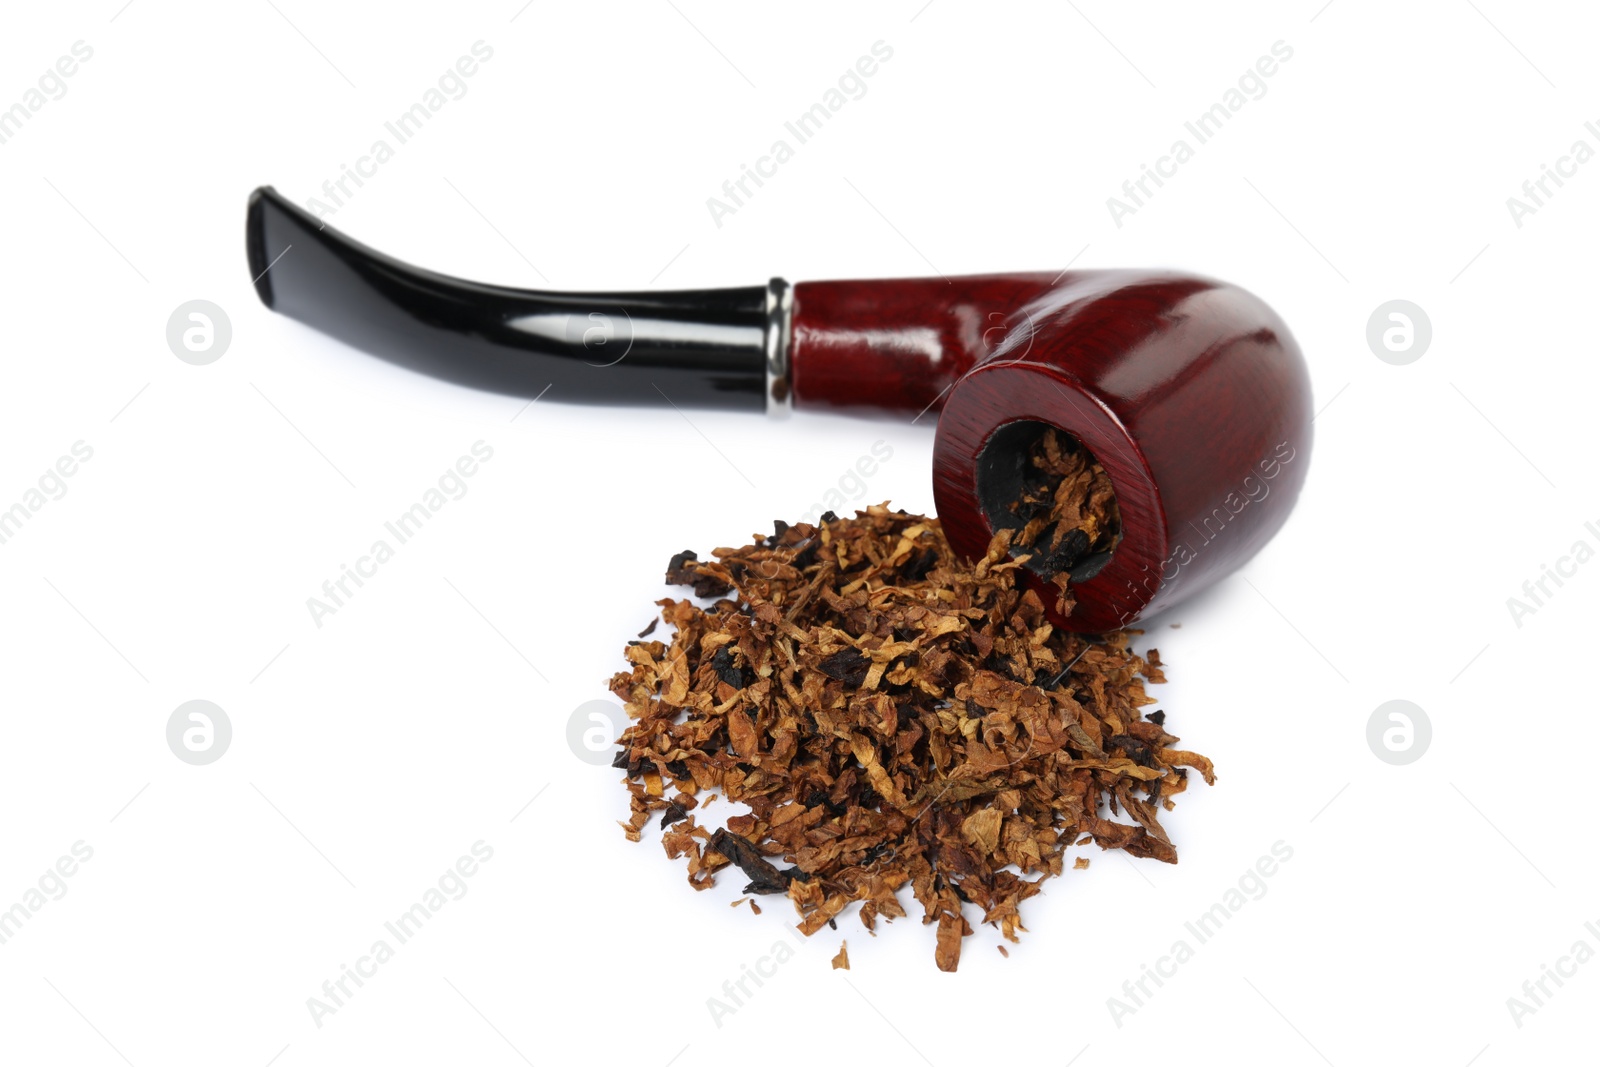 Photo of Smoking pipe with tobacco on white background